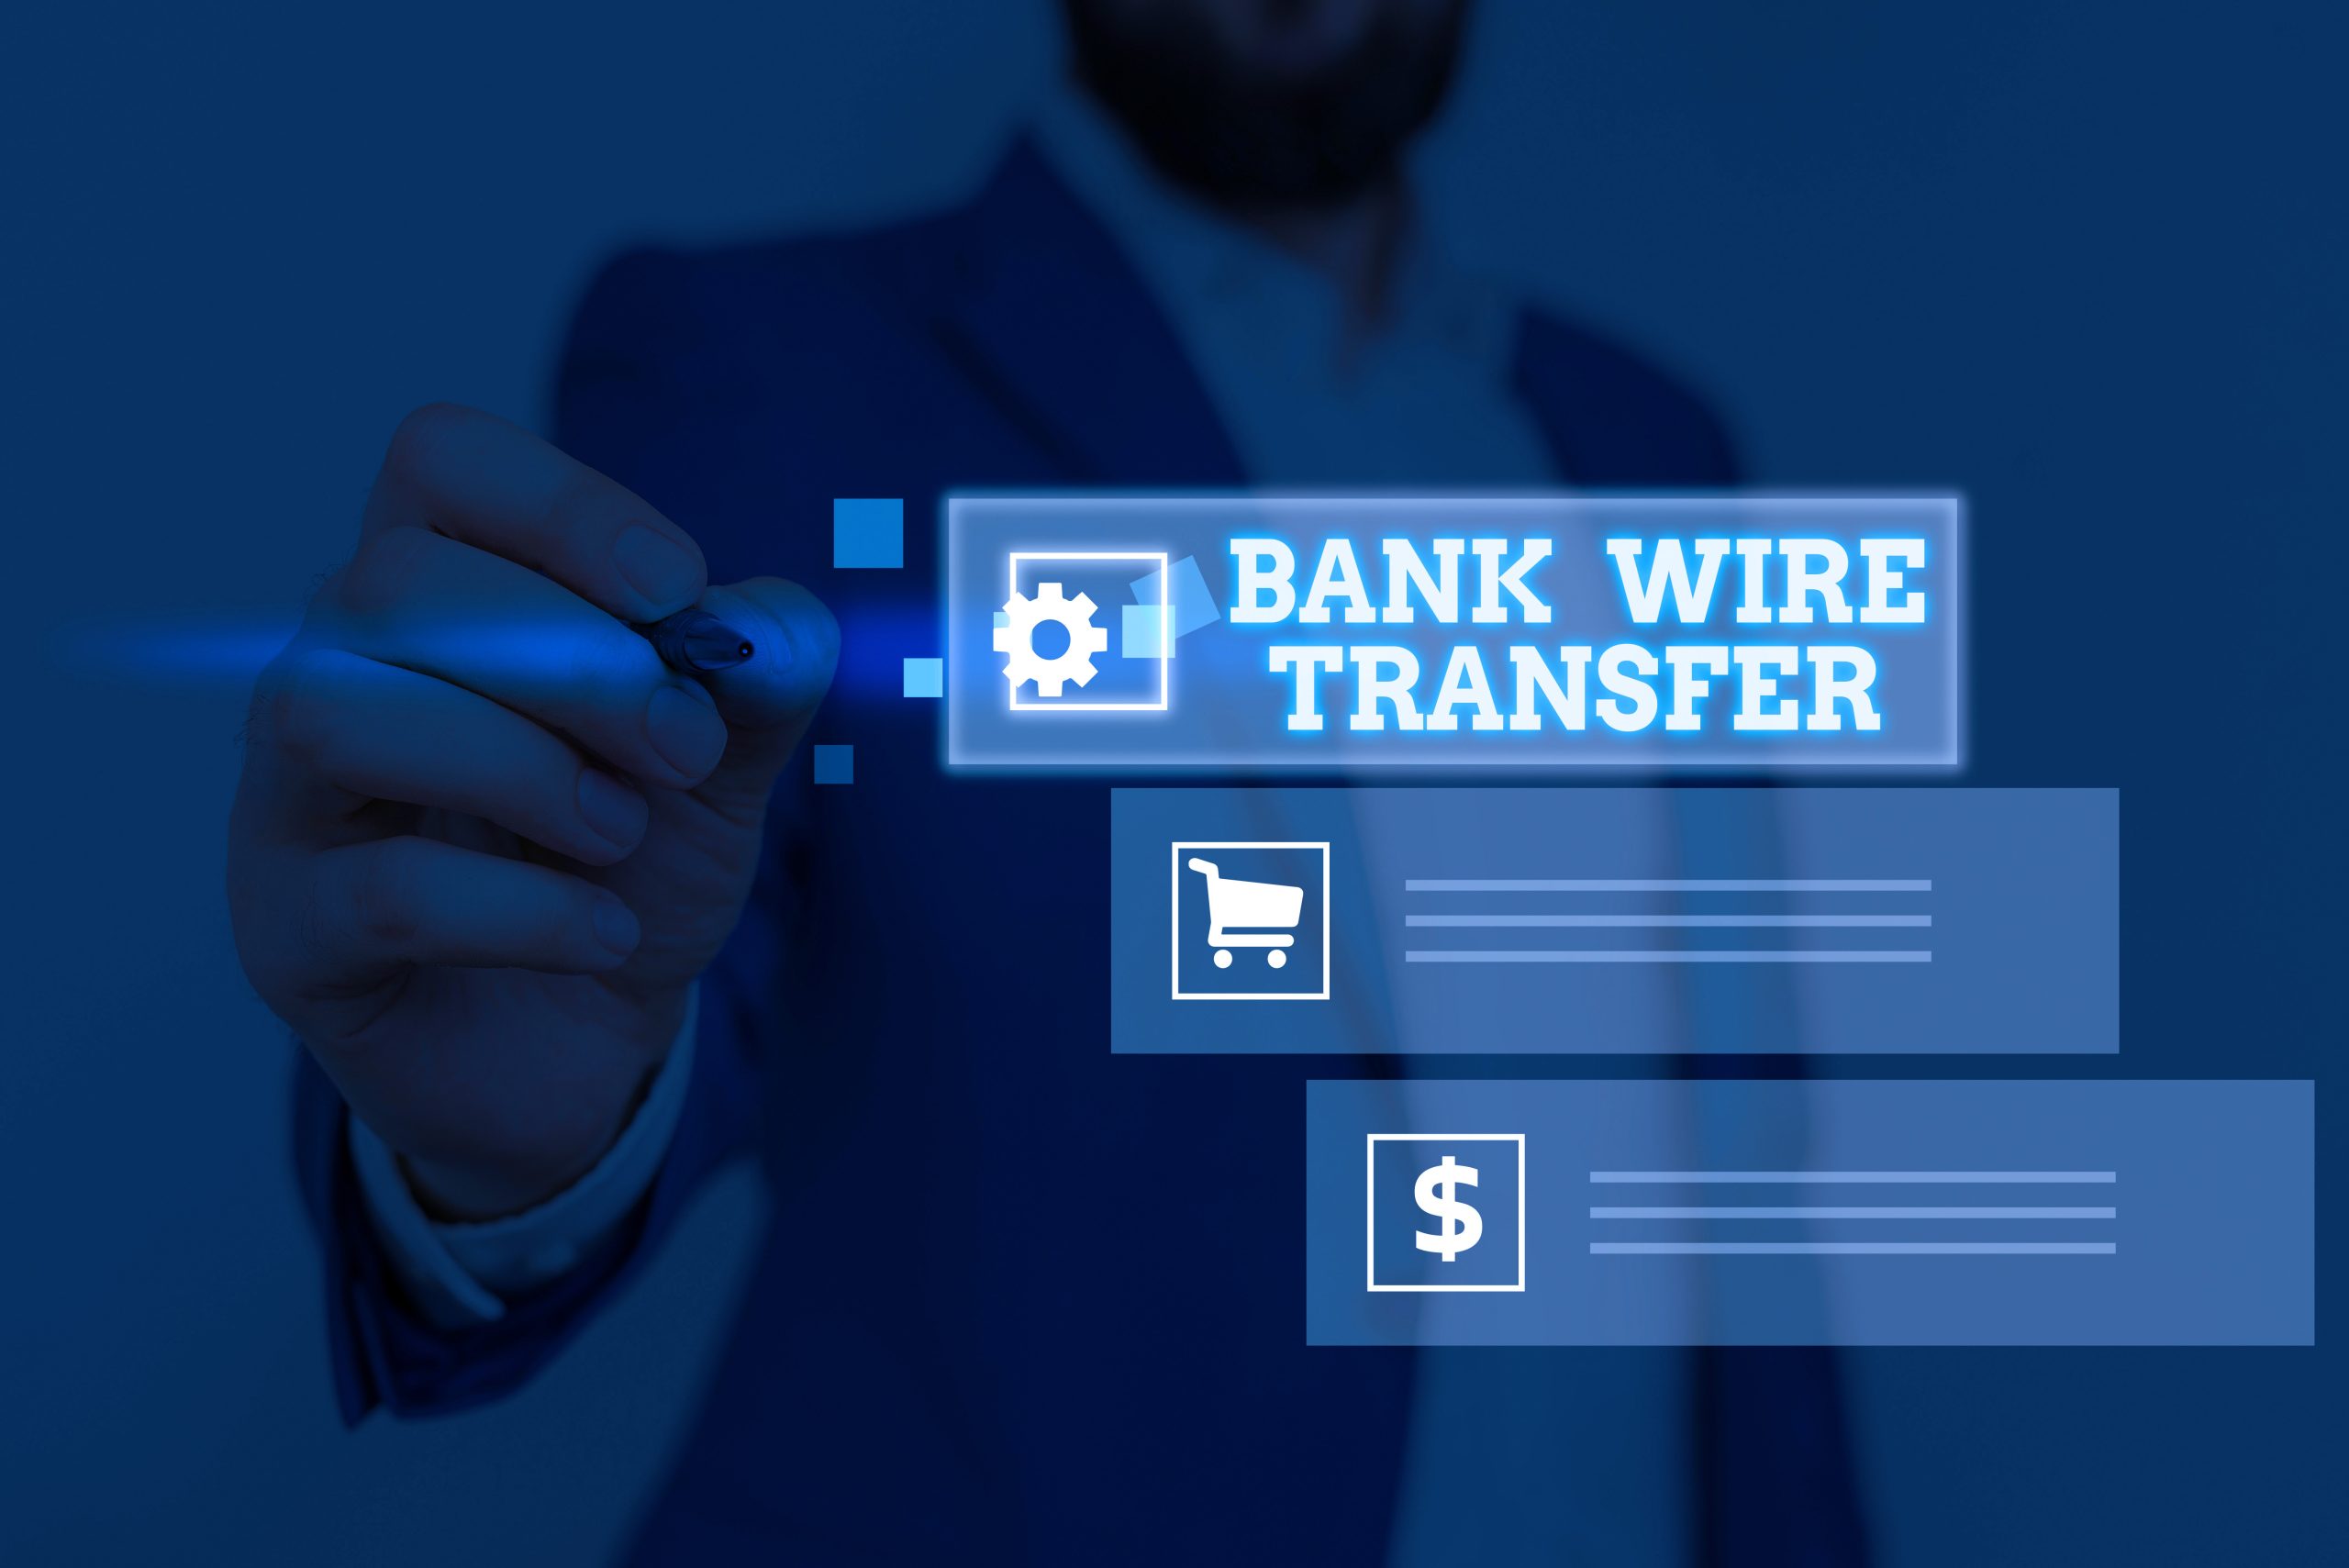 Stock image of a business person holding a pen pointing to some text reading "bank wire transfer"